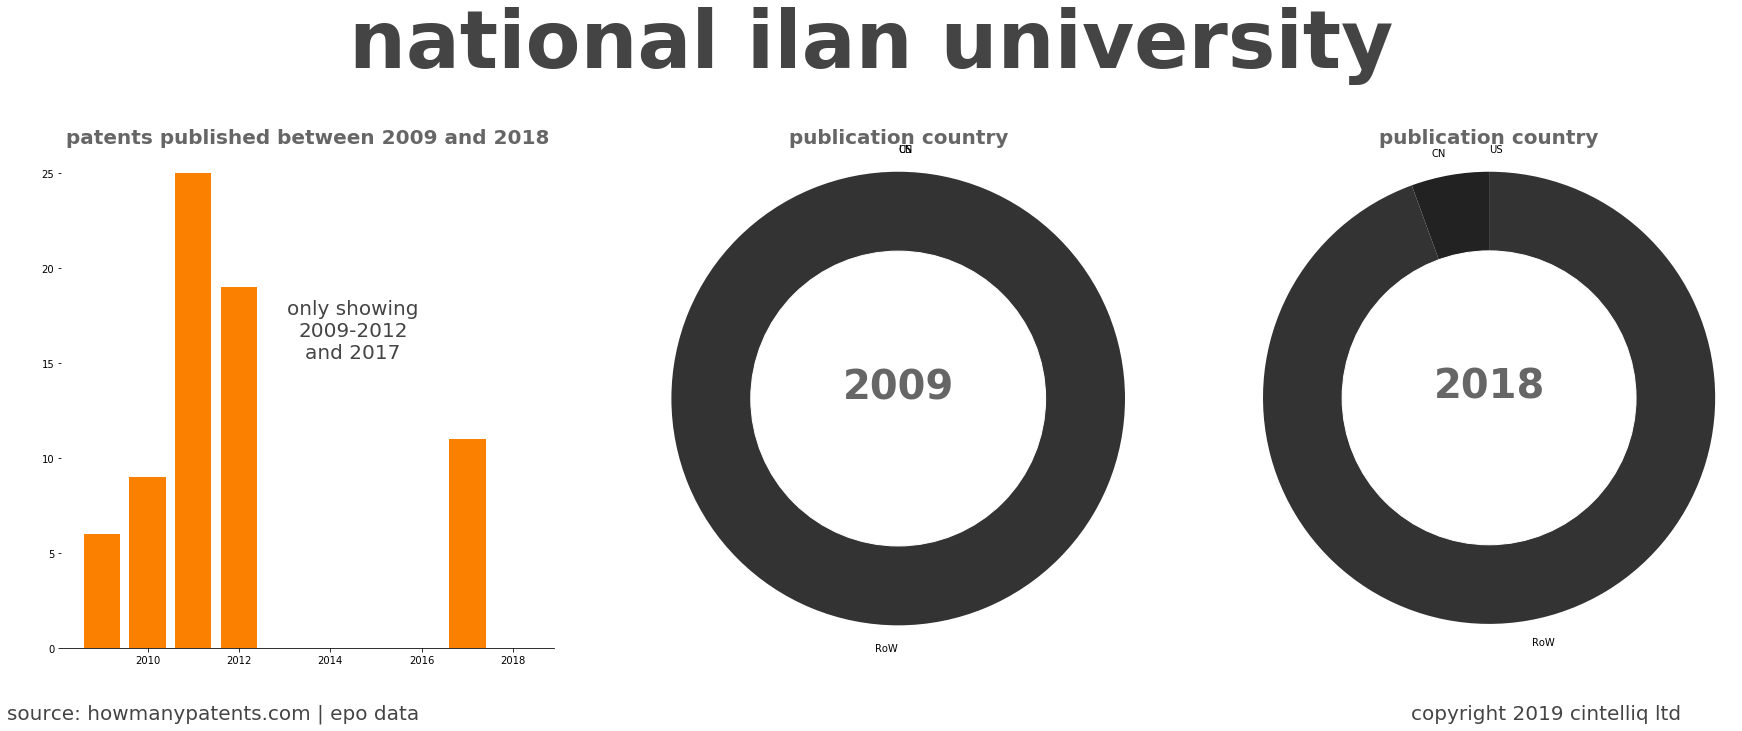 summary of patents for National Ilan University